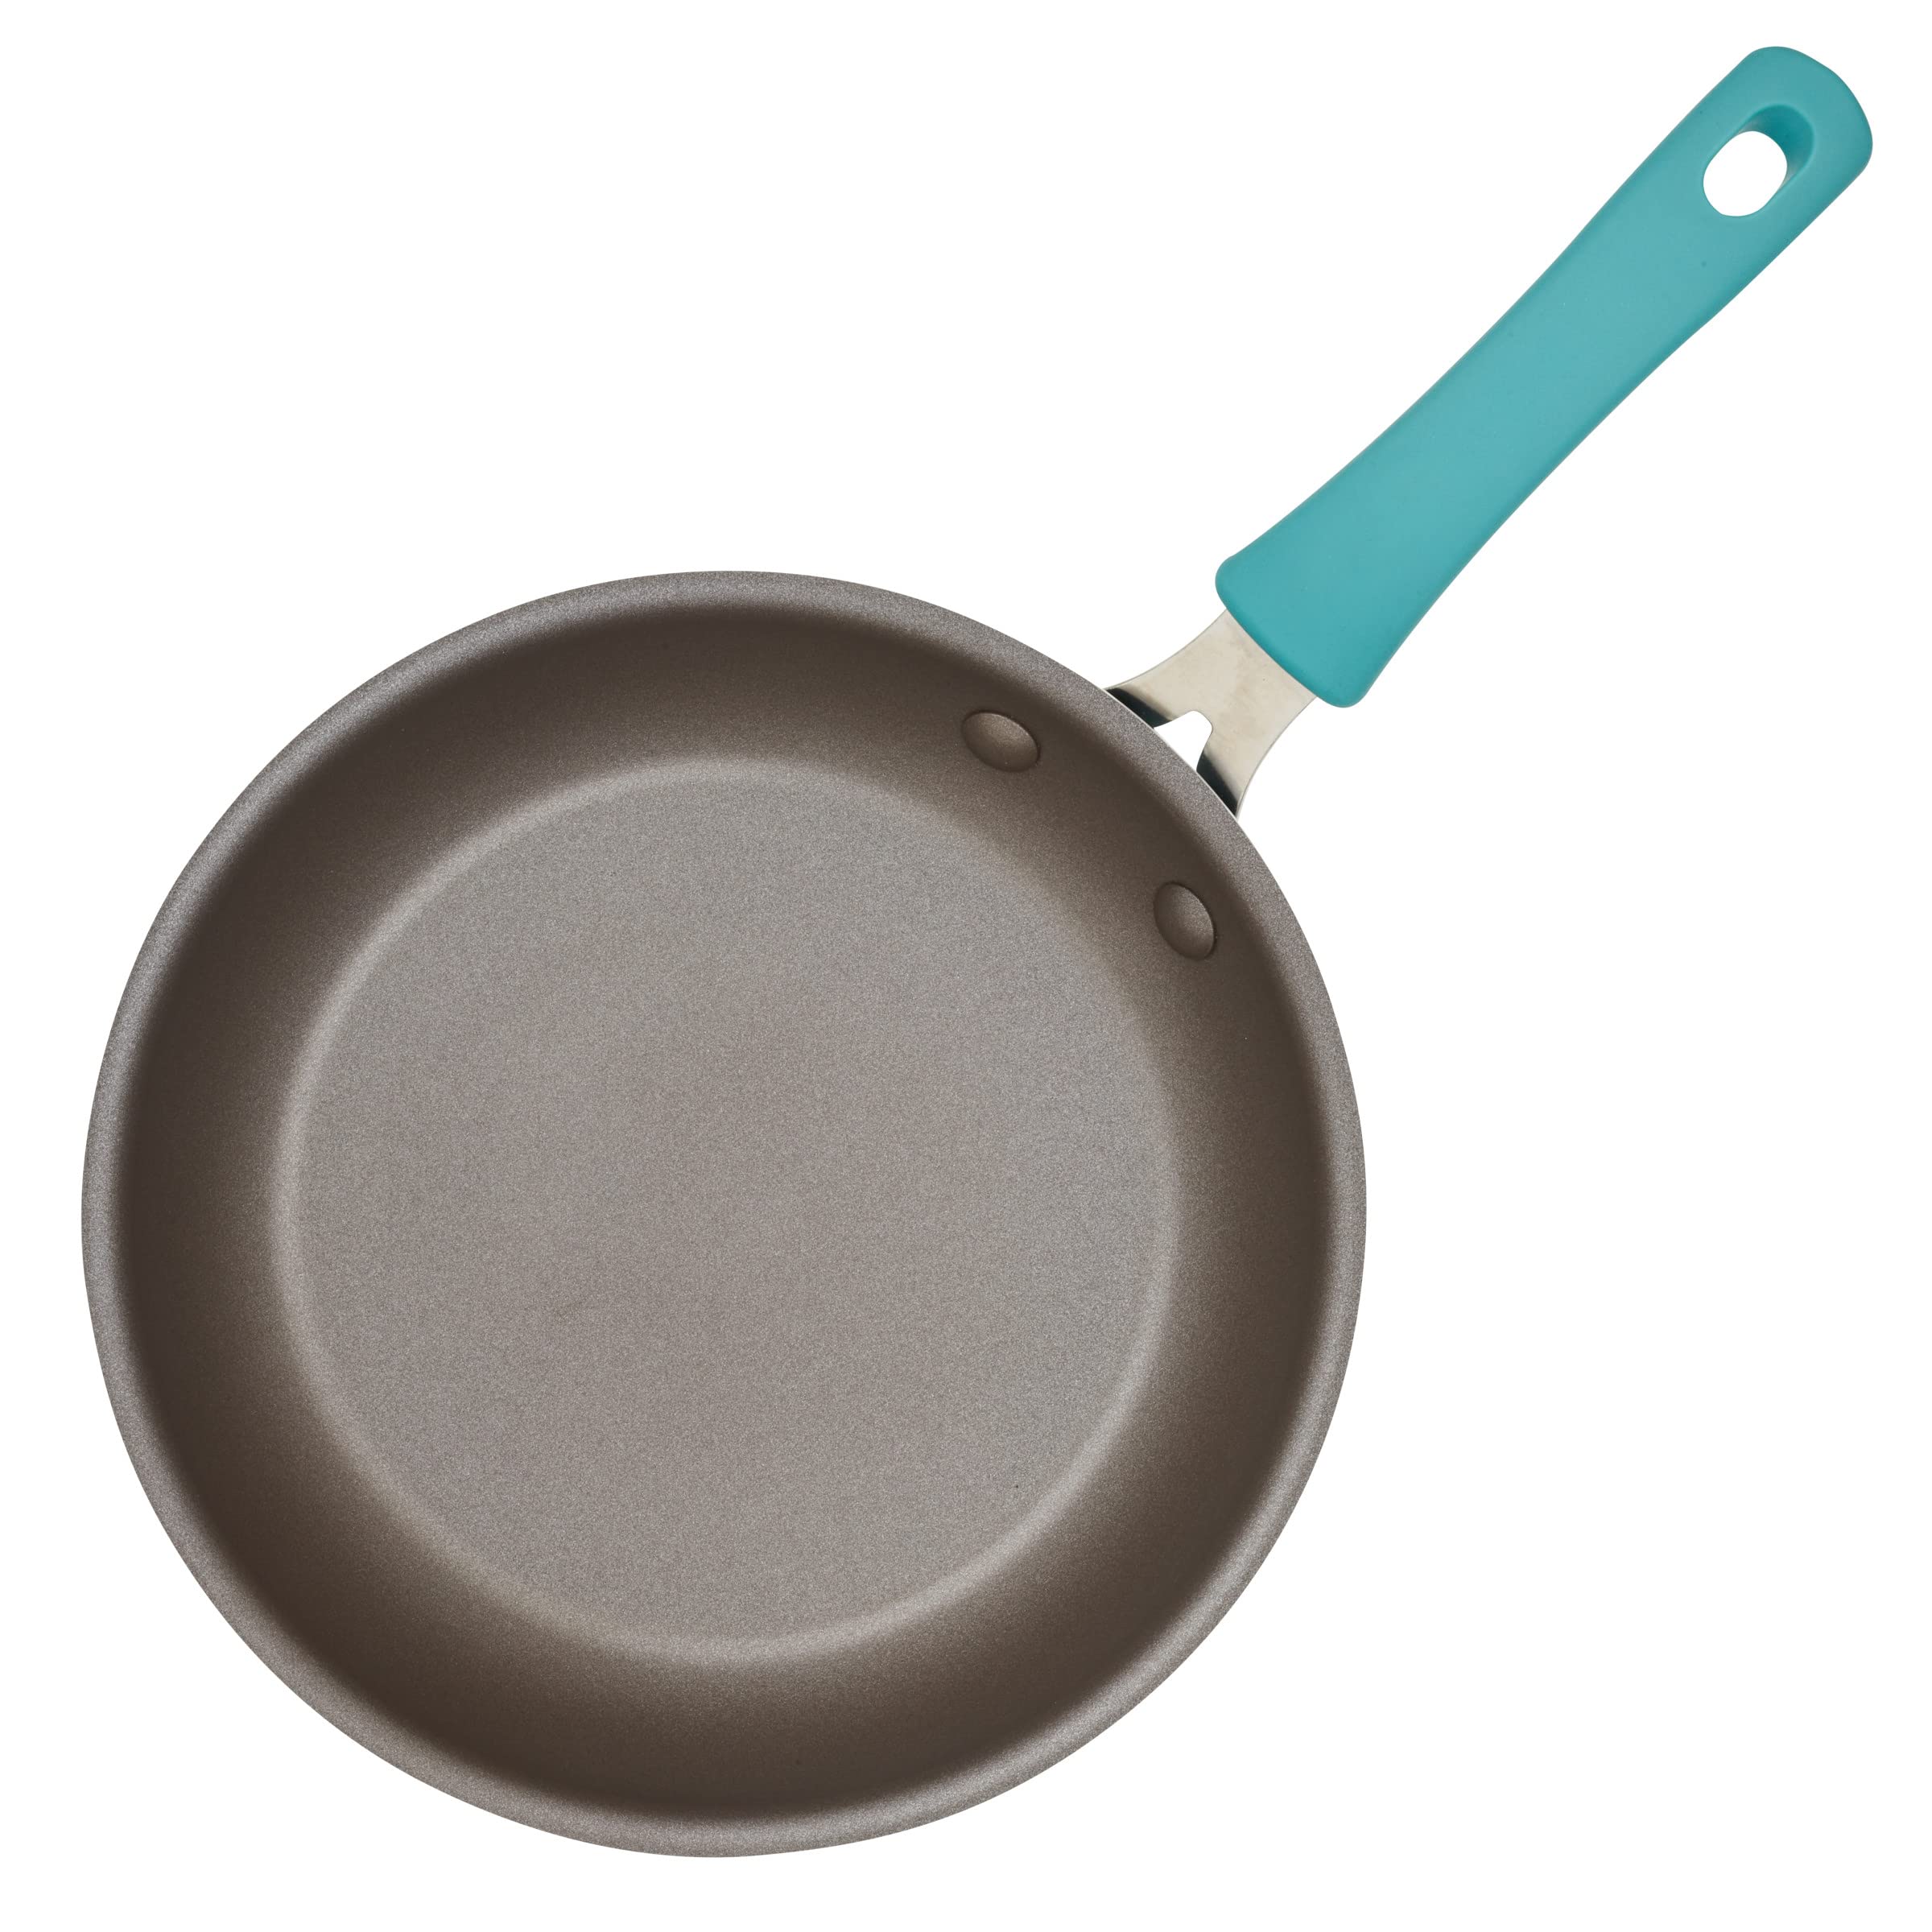 Rachael Ray Cook + Create Nonstick Frying Pans/Skillet Set, 9.5 Inch and 11.75 Inch, Agave Blue